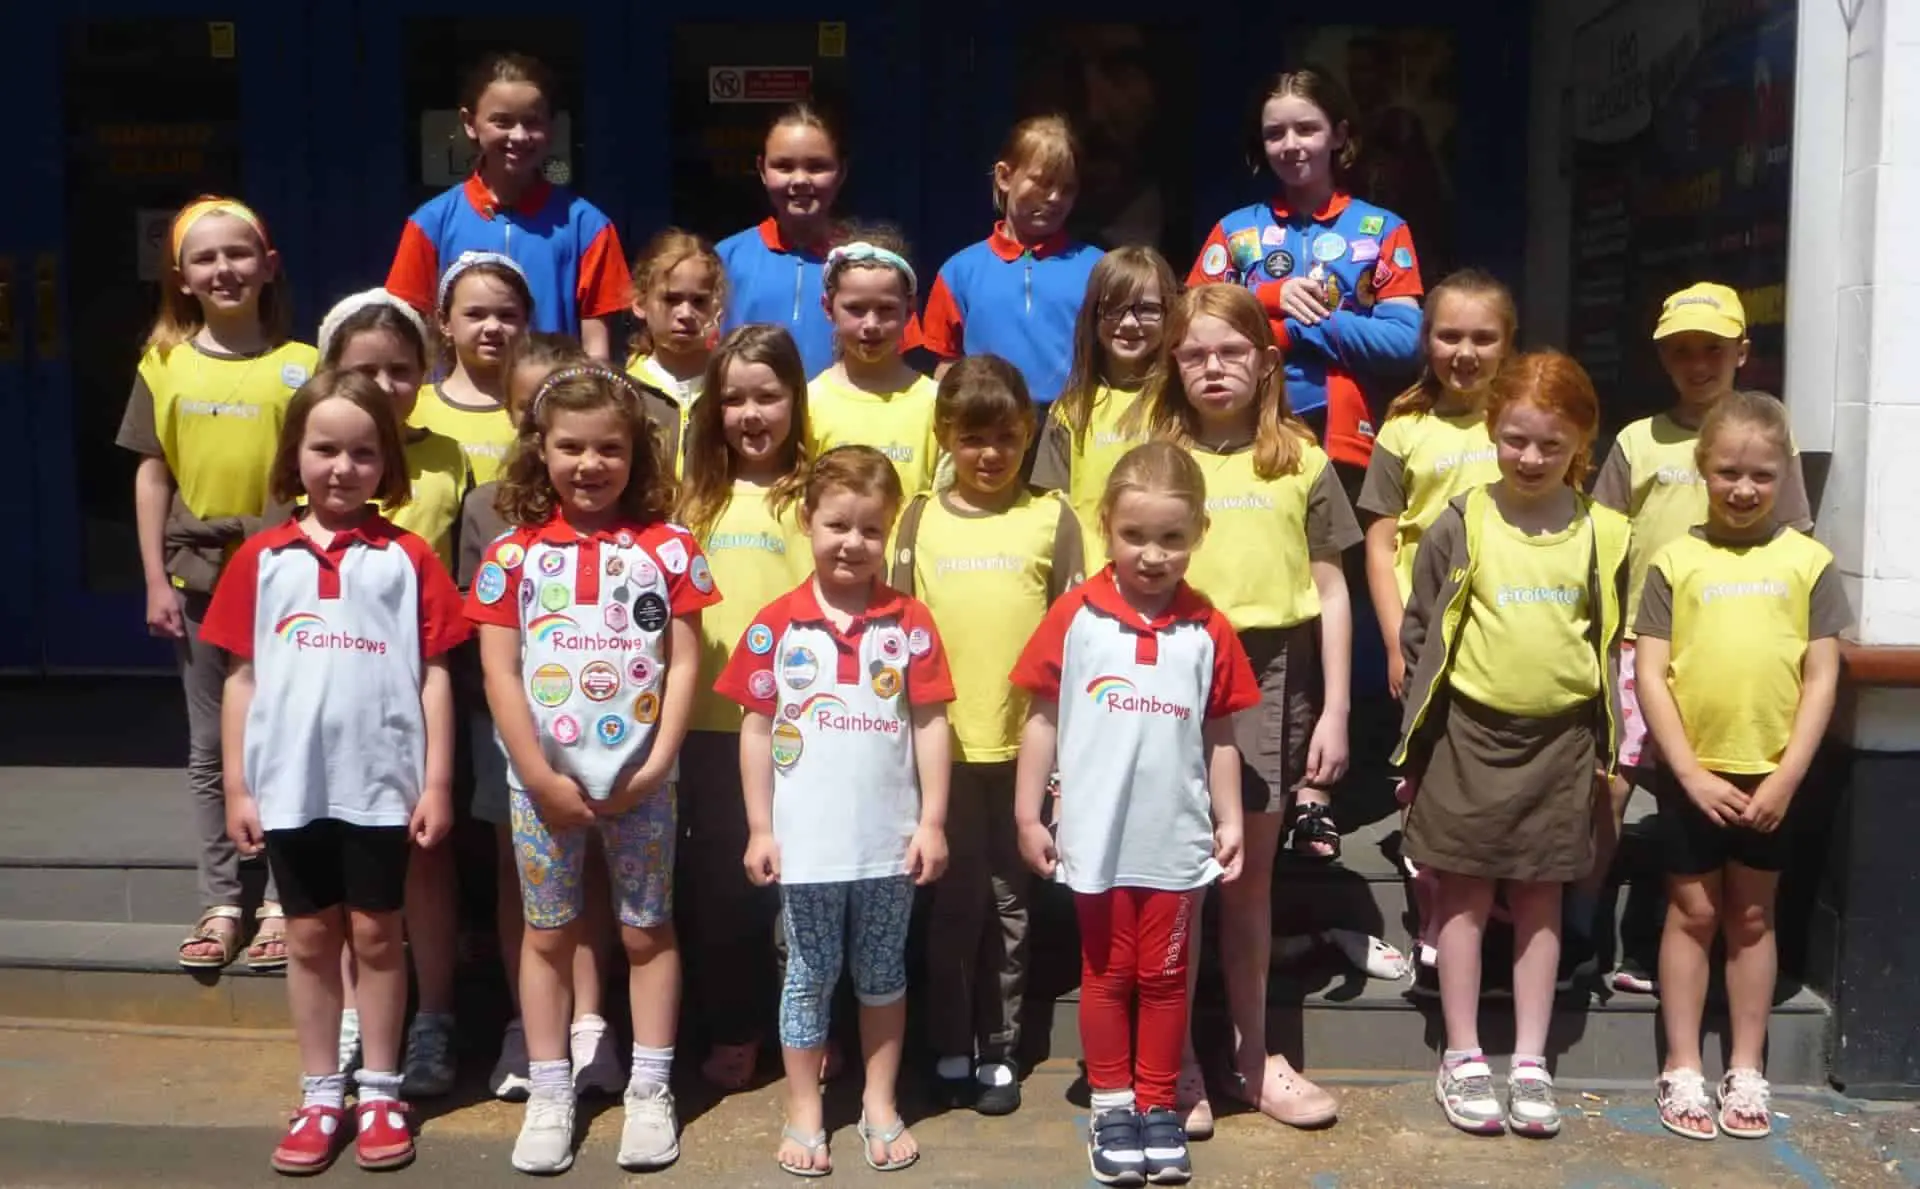 Girls representing the IW Girlguiding Sections